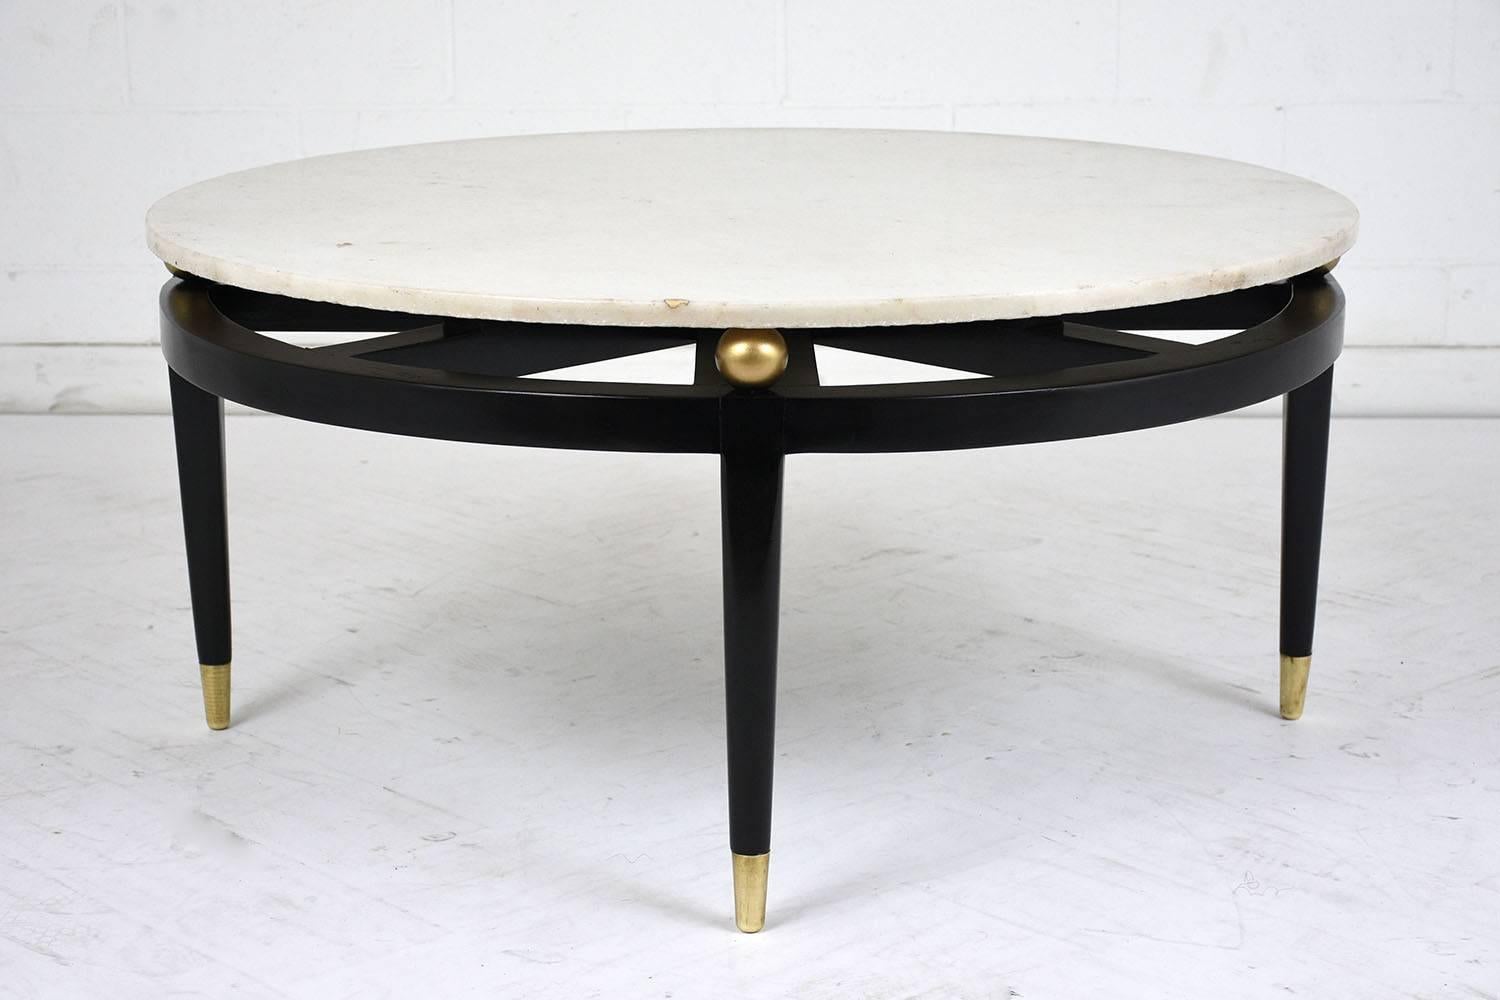 This 1960s Mid-Century Modern-style coffee table features a marble top with a wood base. The white marble top is cut in a circular pattern with a flat polish finish. The top is floating on top of the wood base and rests on a center axle with suction